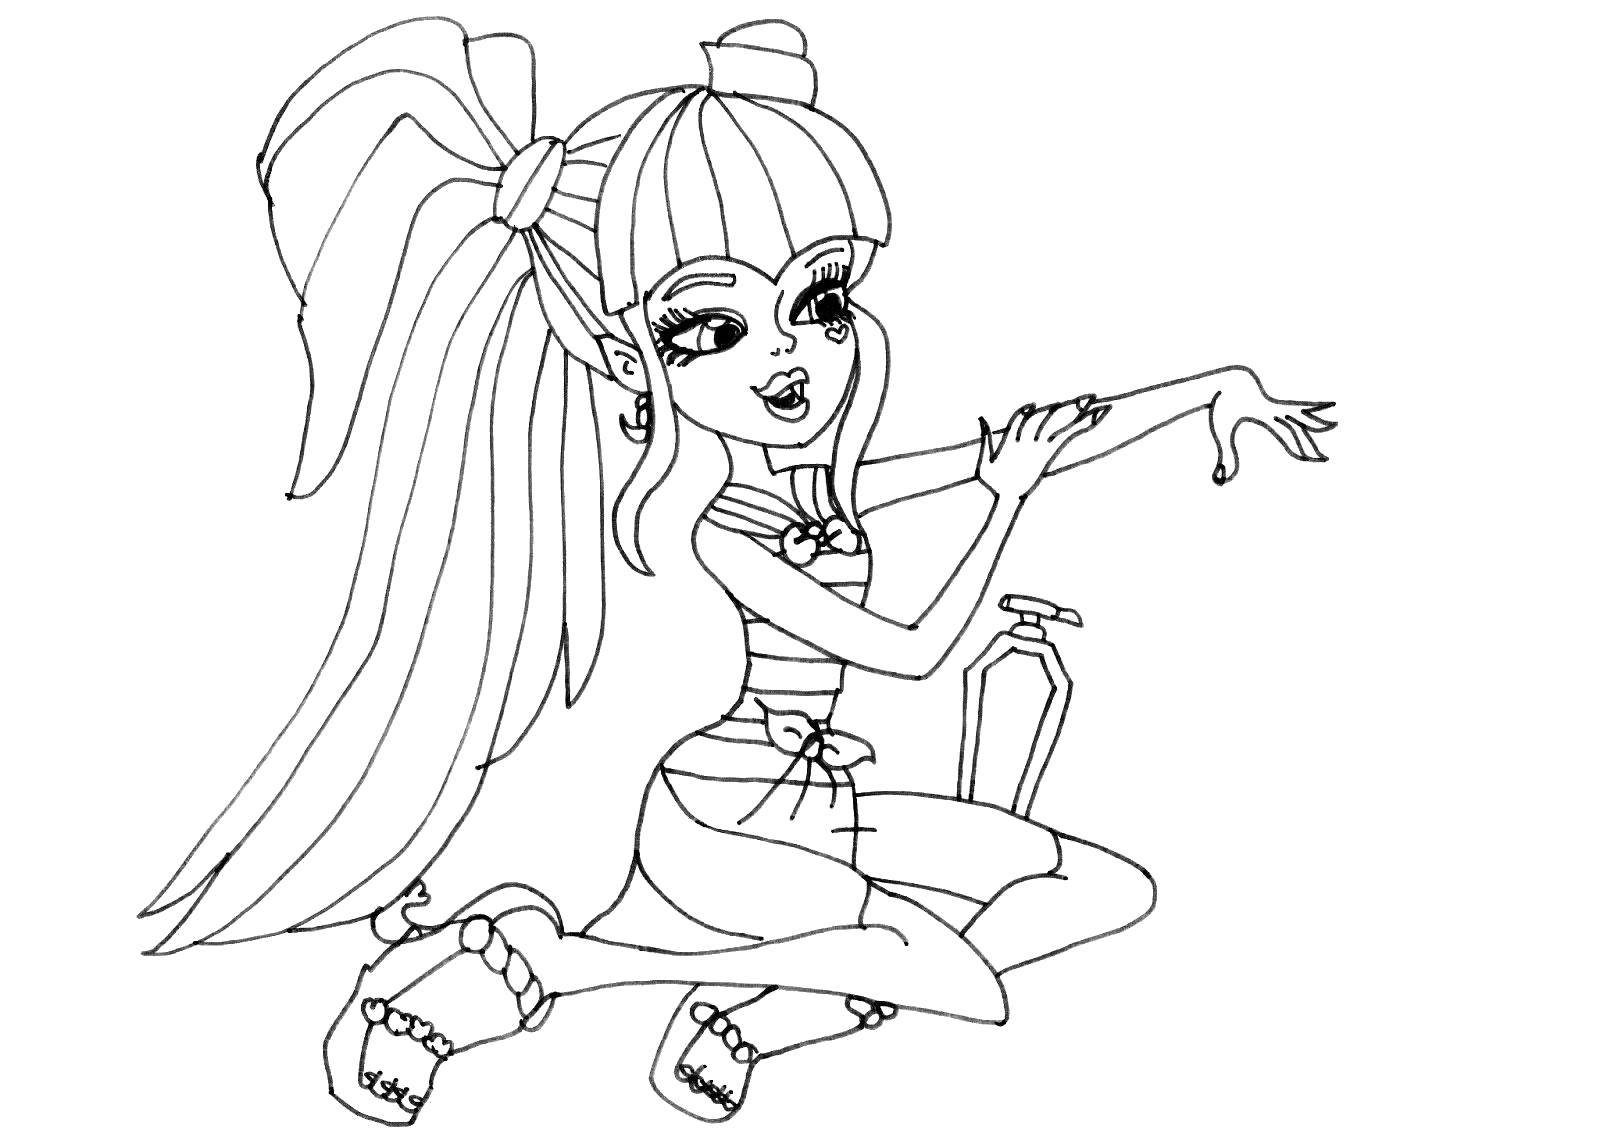 Coloring Student of monster high. Category monster high. Tags:  Monster High.